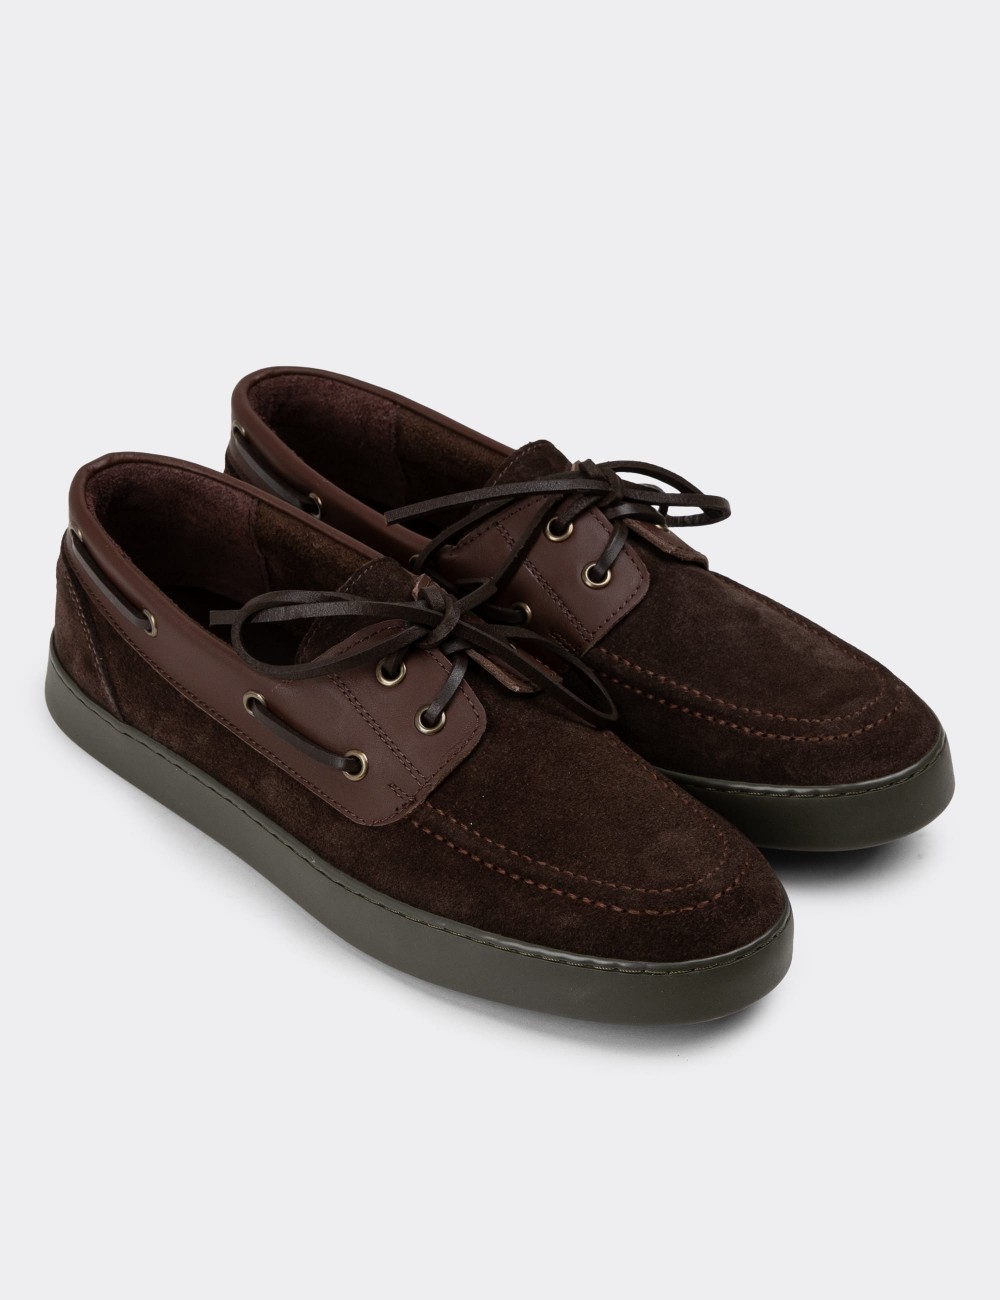 Brown Suede Leather Lace-up Shoes - 01952MKHVC02